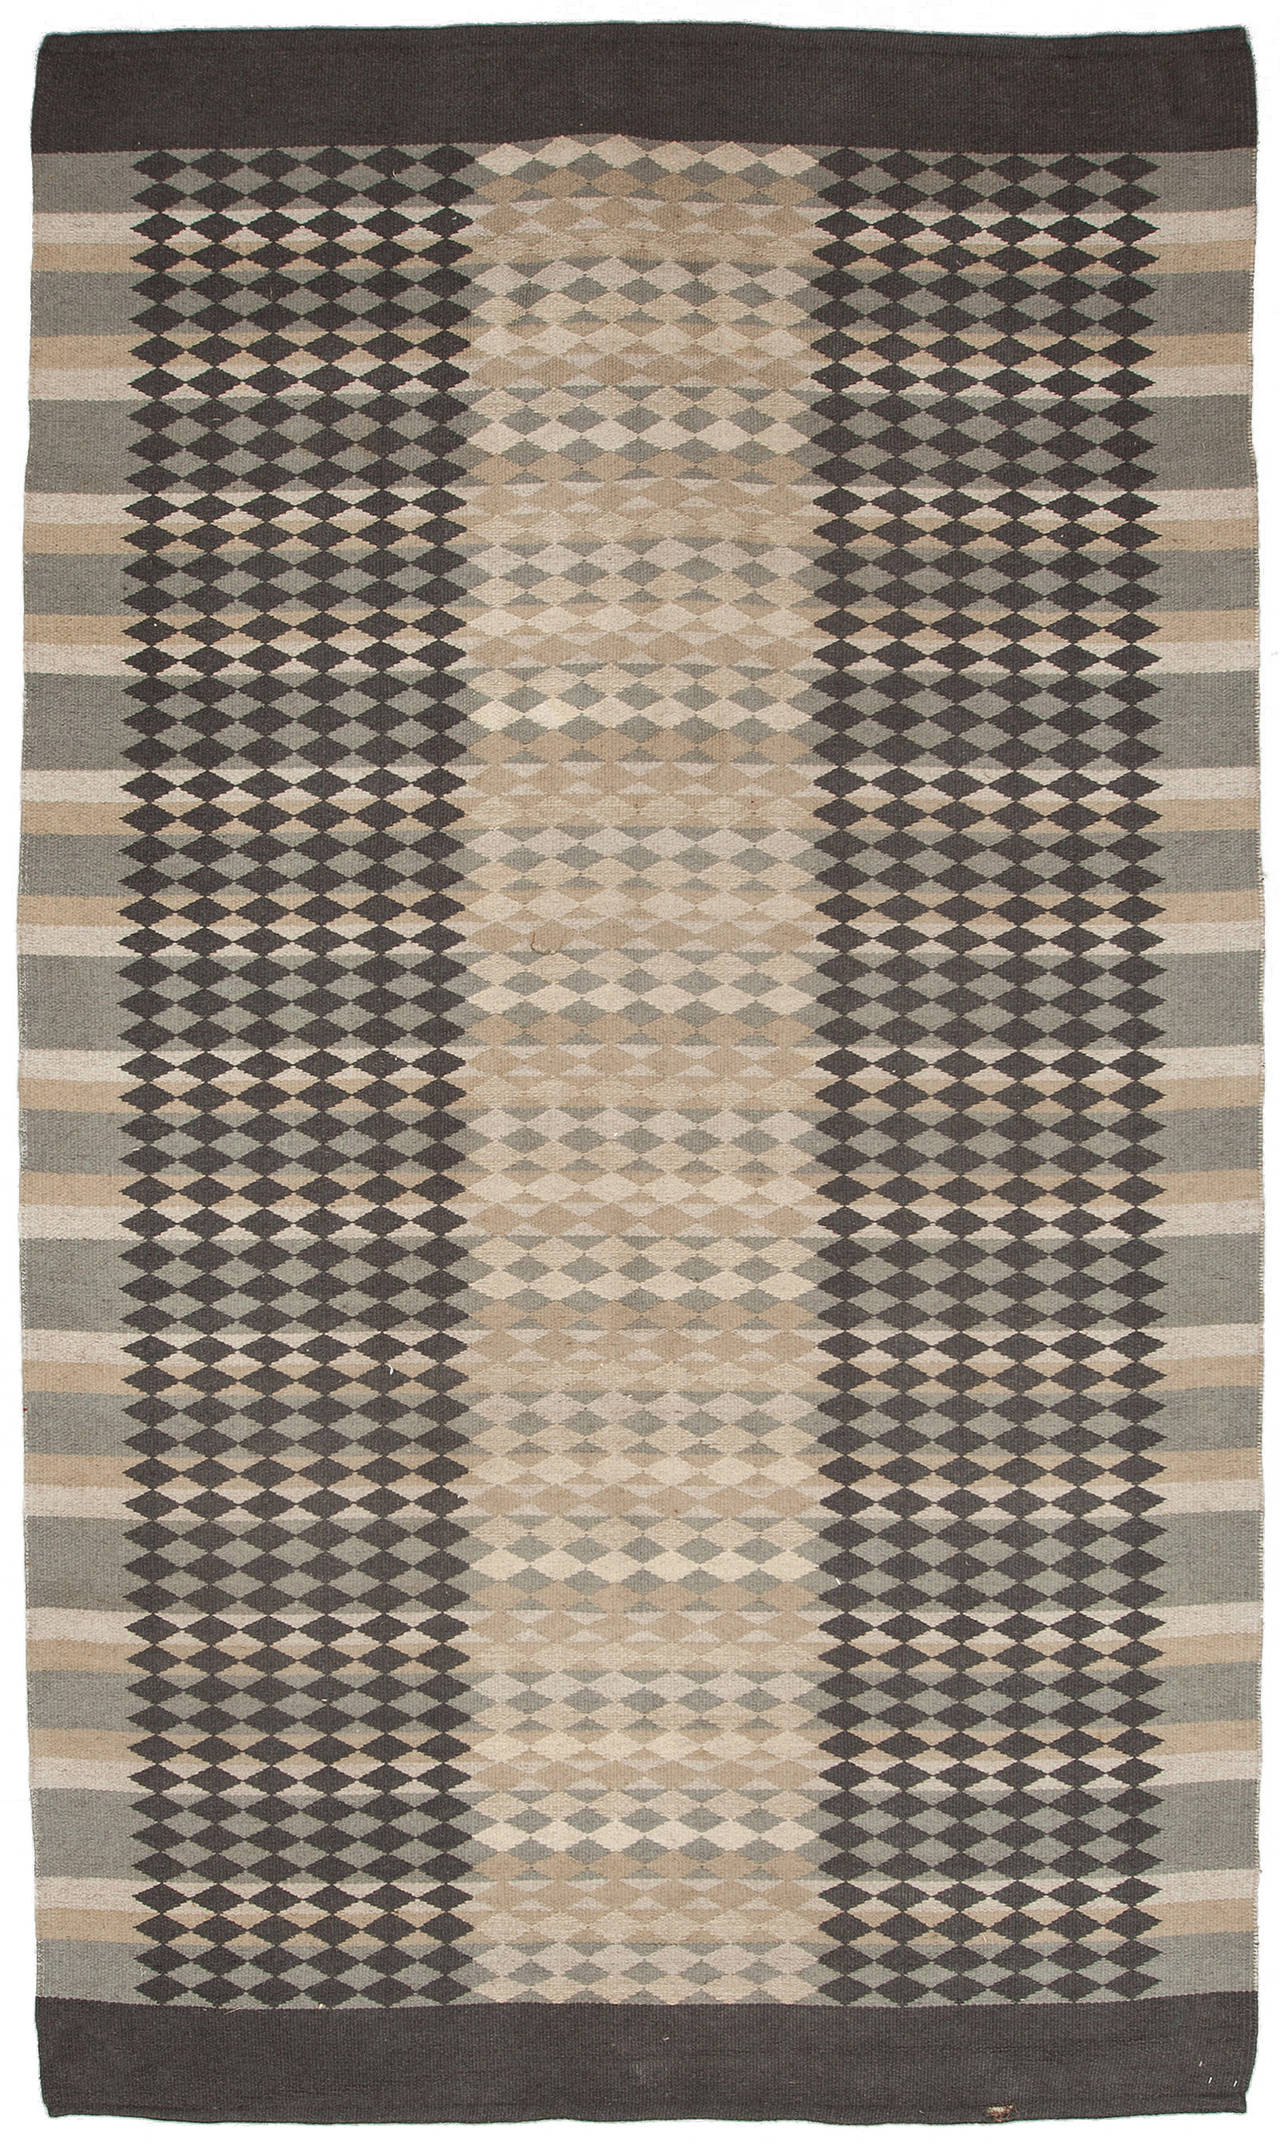 Vintage Swedish double sided flat weave, wool Rug in a harlequin pattern.